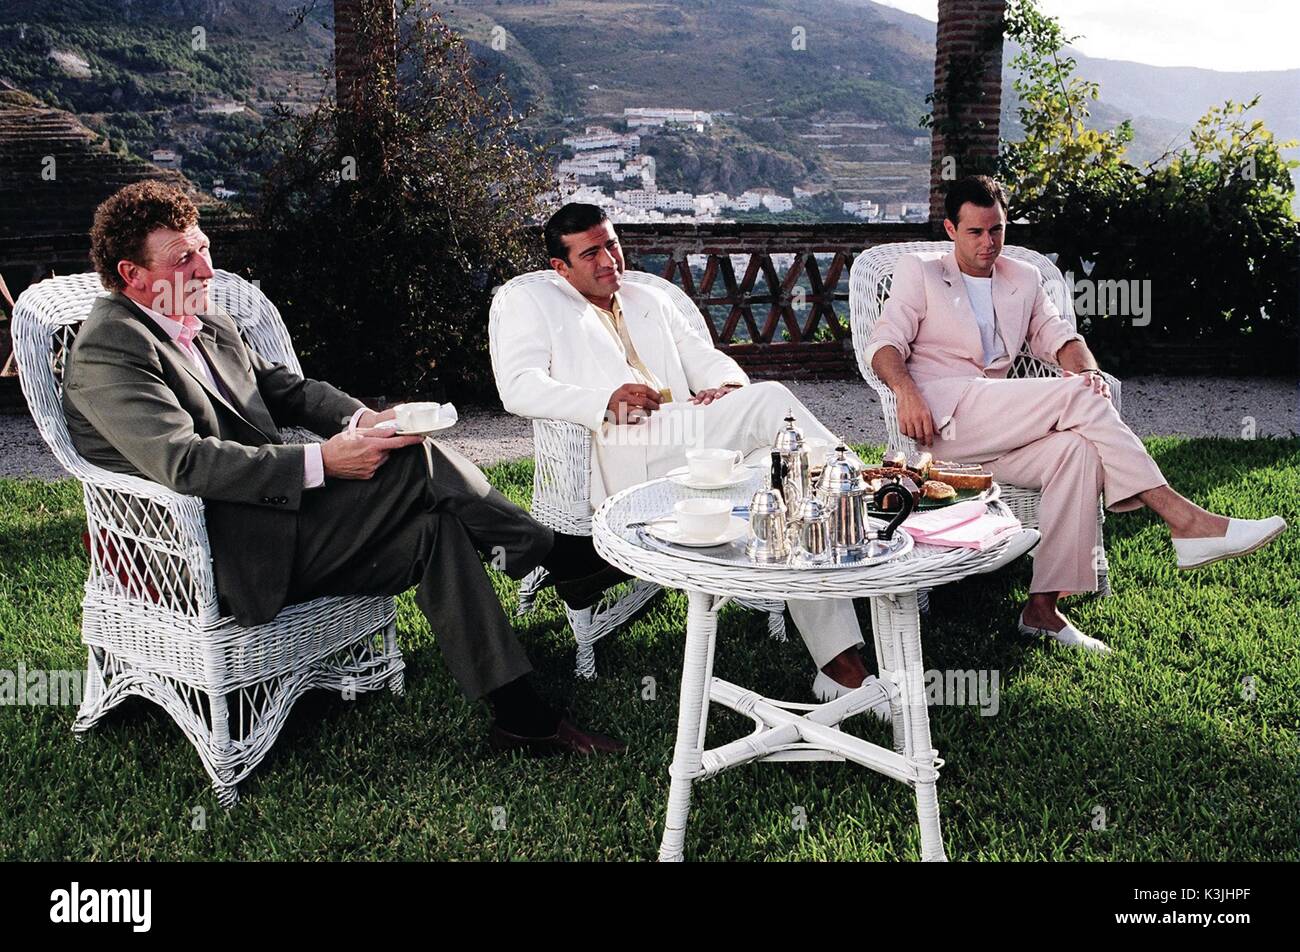 THE BUSINESS Geoff Bell as Sammy, Danny Dyer as Frankie, Tamer Hassan as Charlie     Date: 2005 Stock Photo